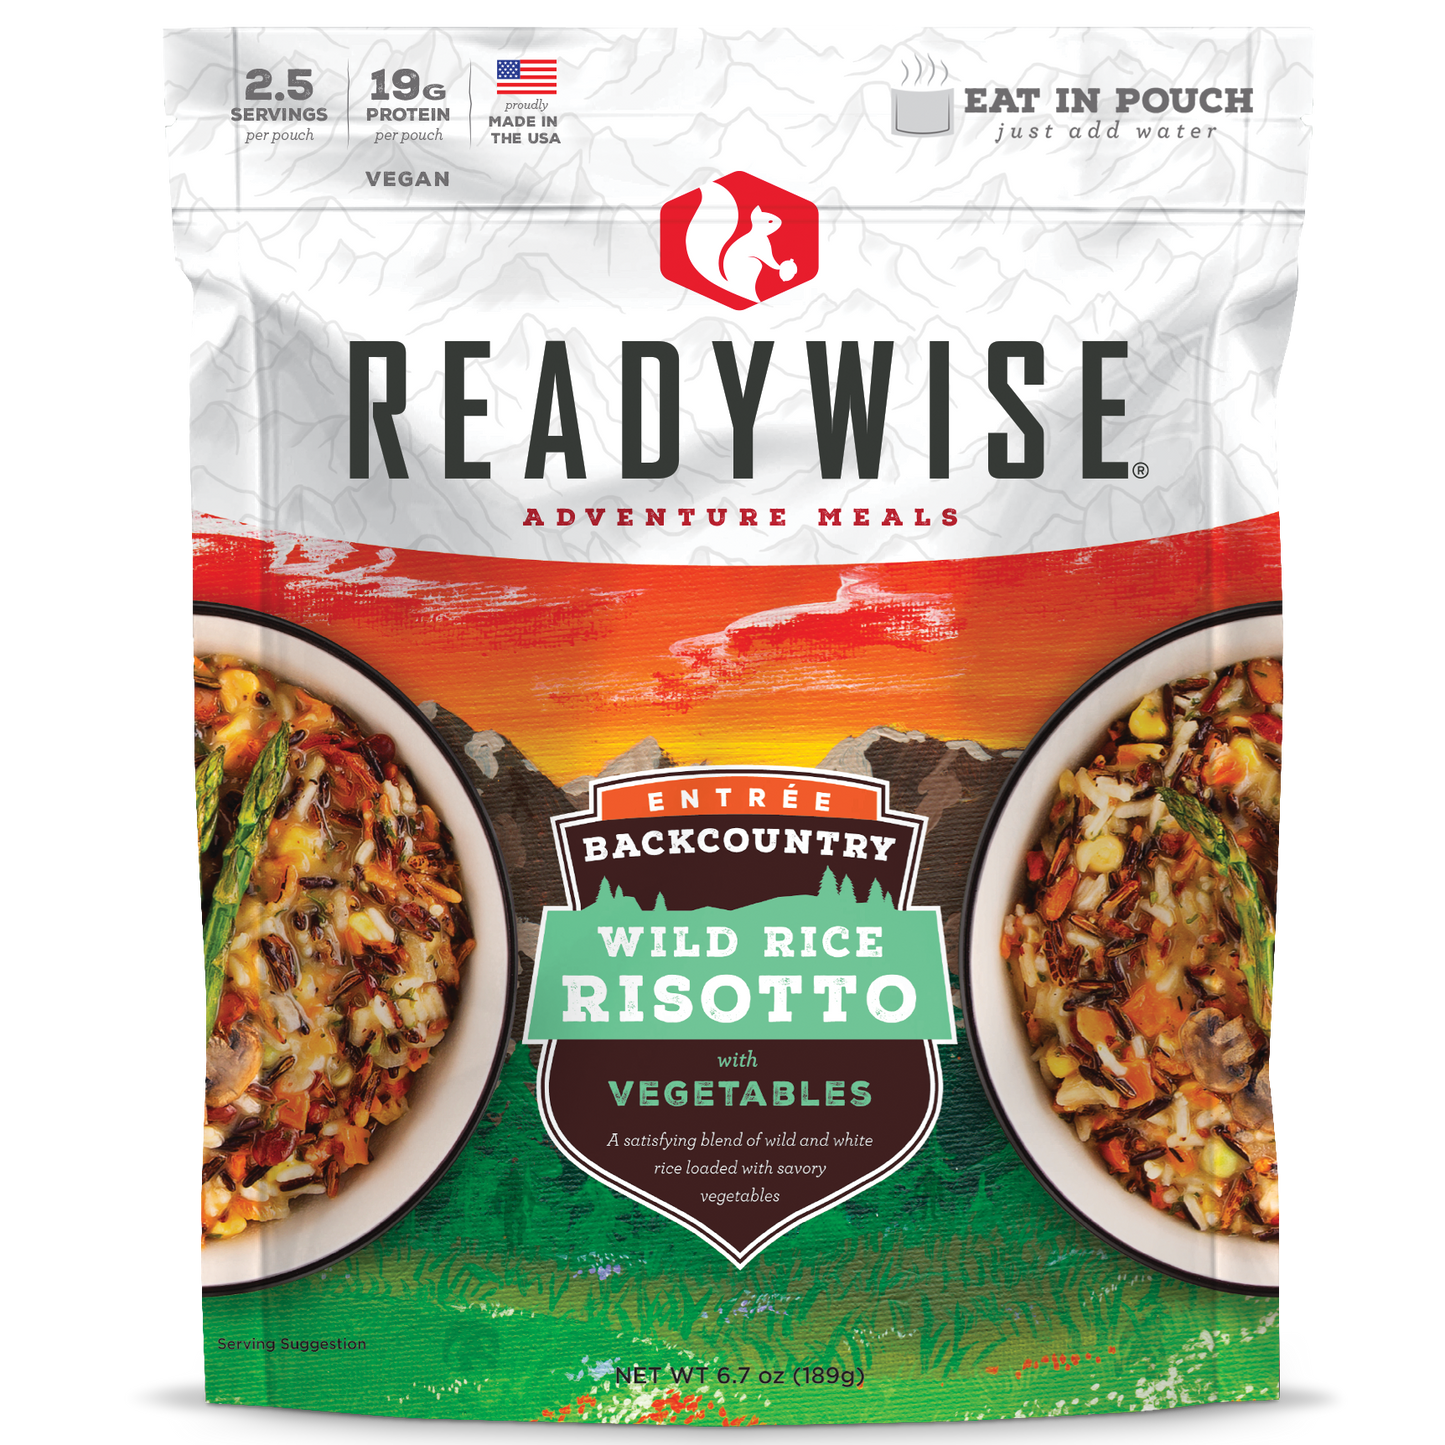 Adventure Meals: Backcountry Wild Rice Risotto